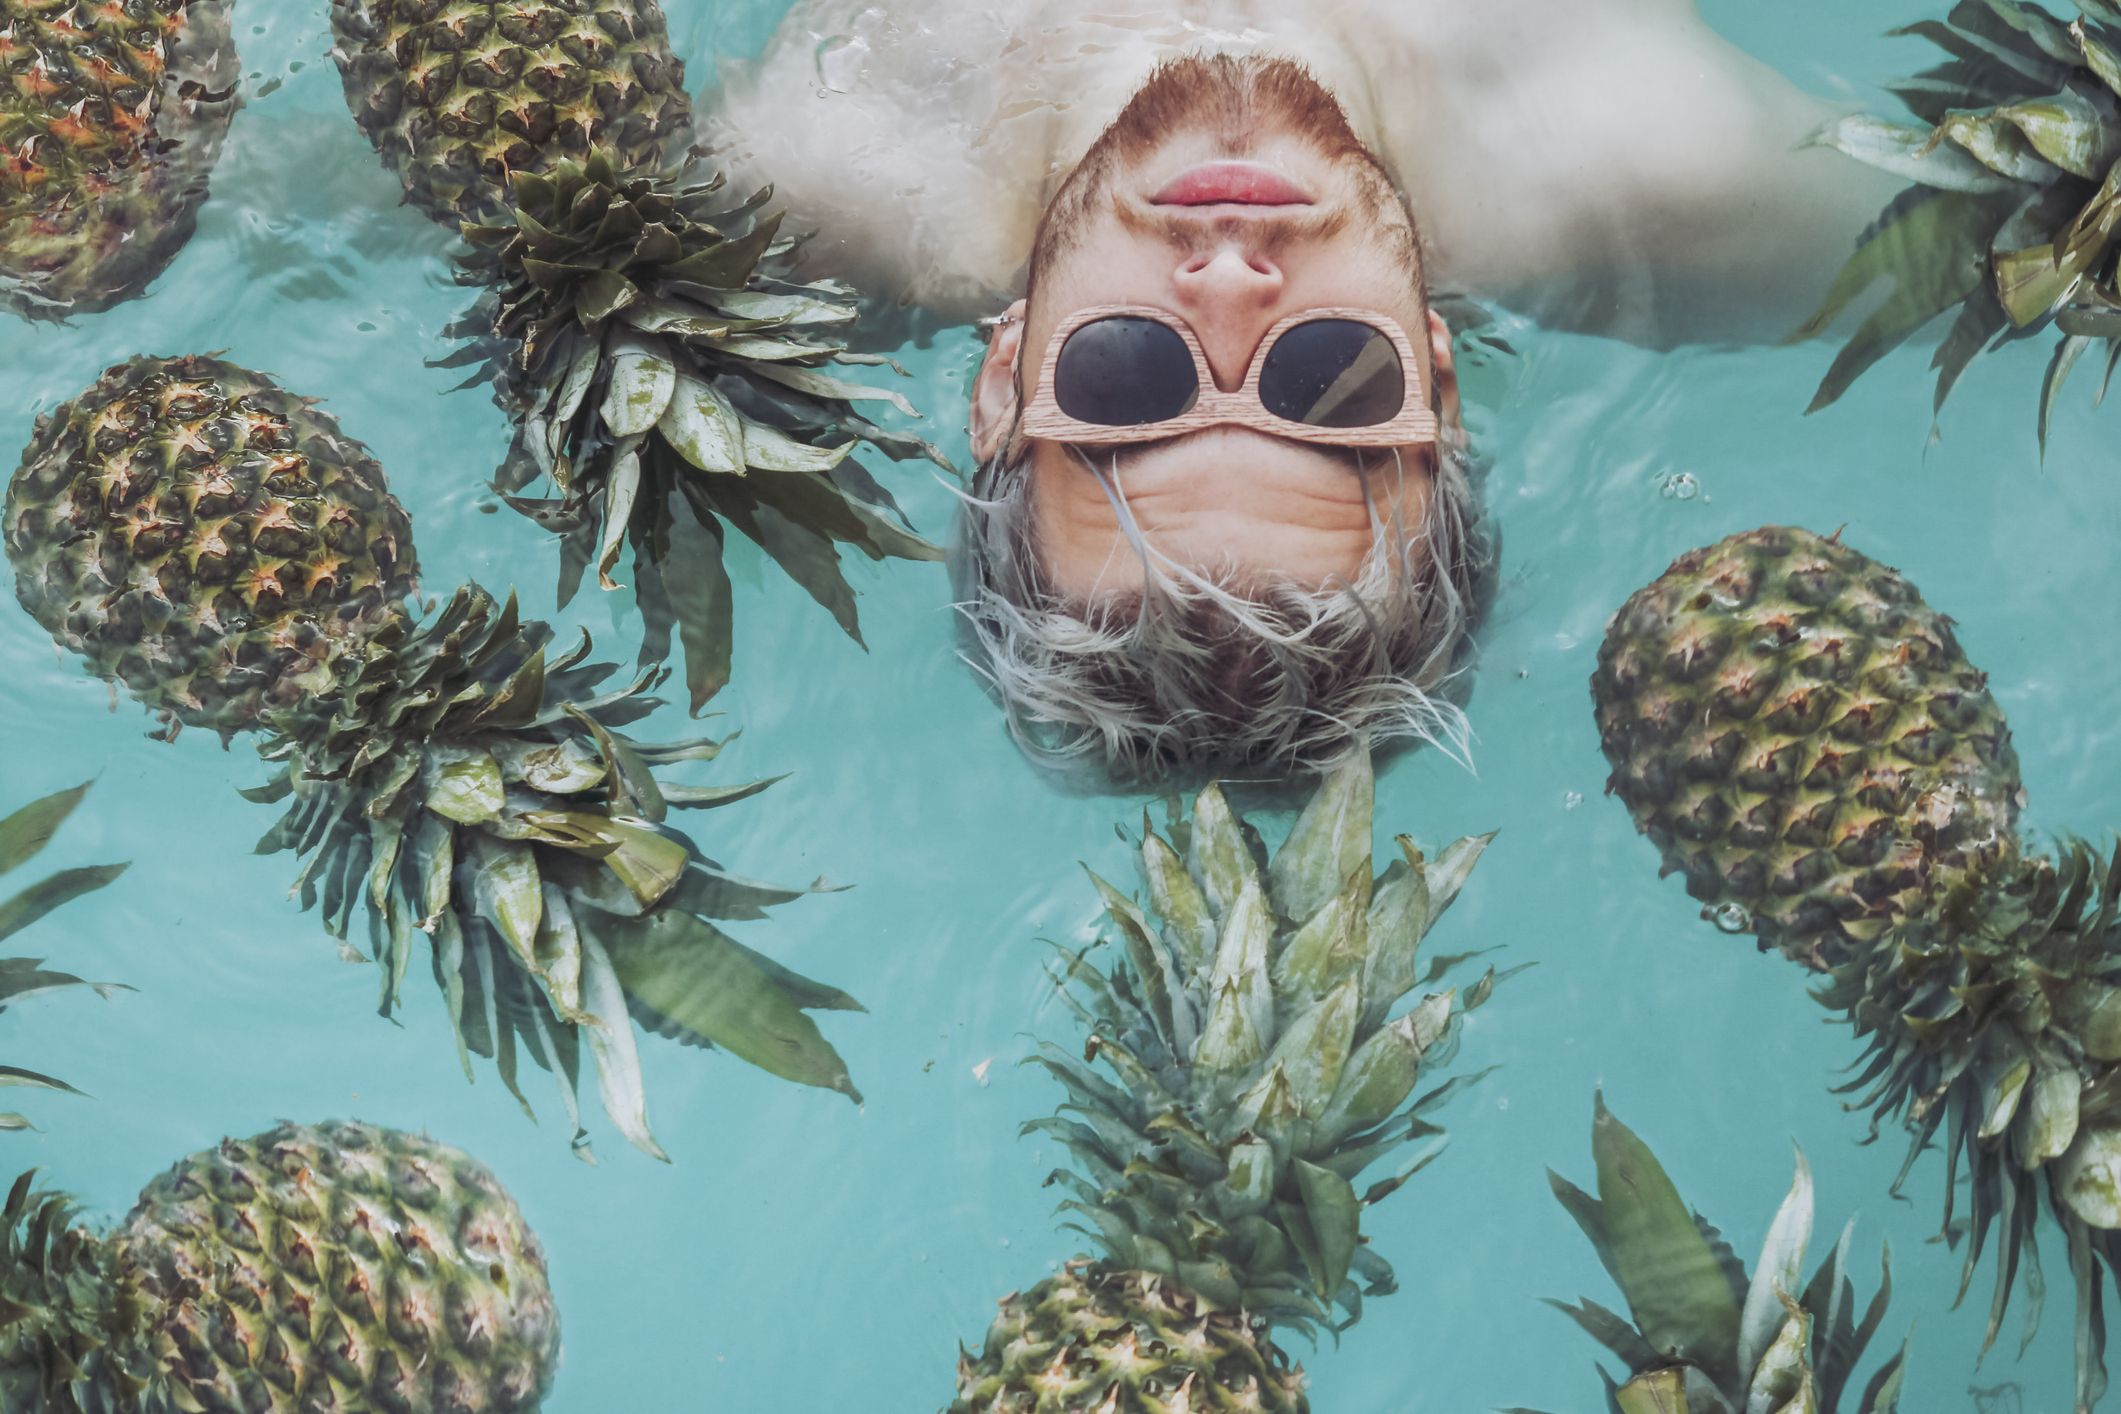 The Upside-Down Pineapple Has a Secret, Sexy Meaning